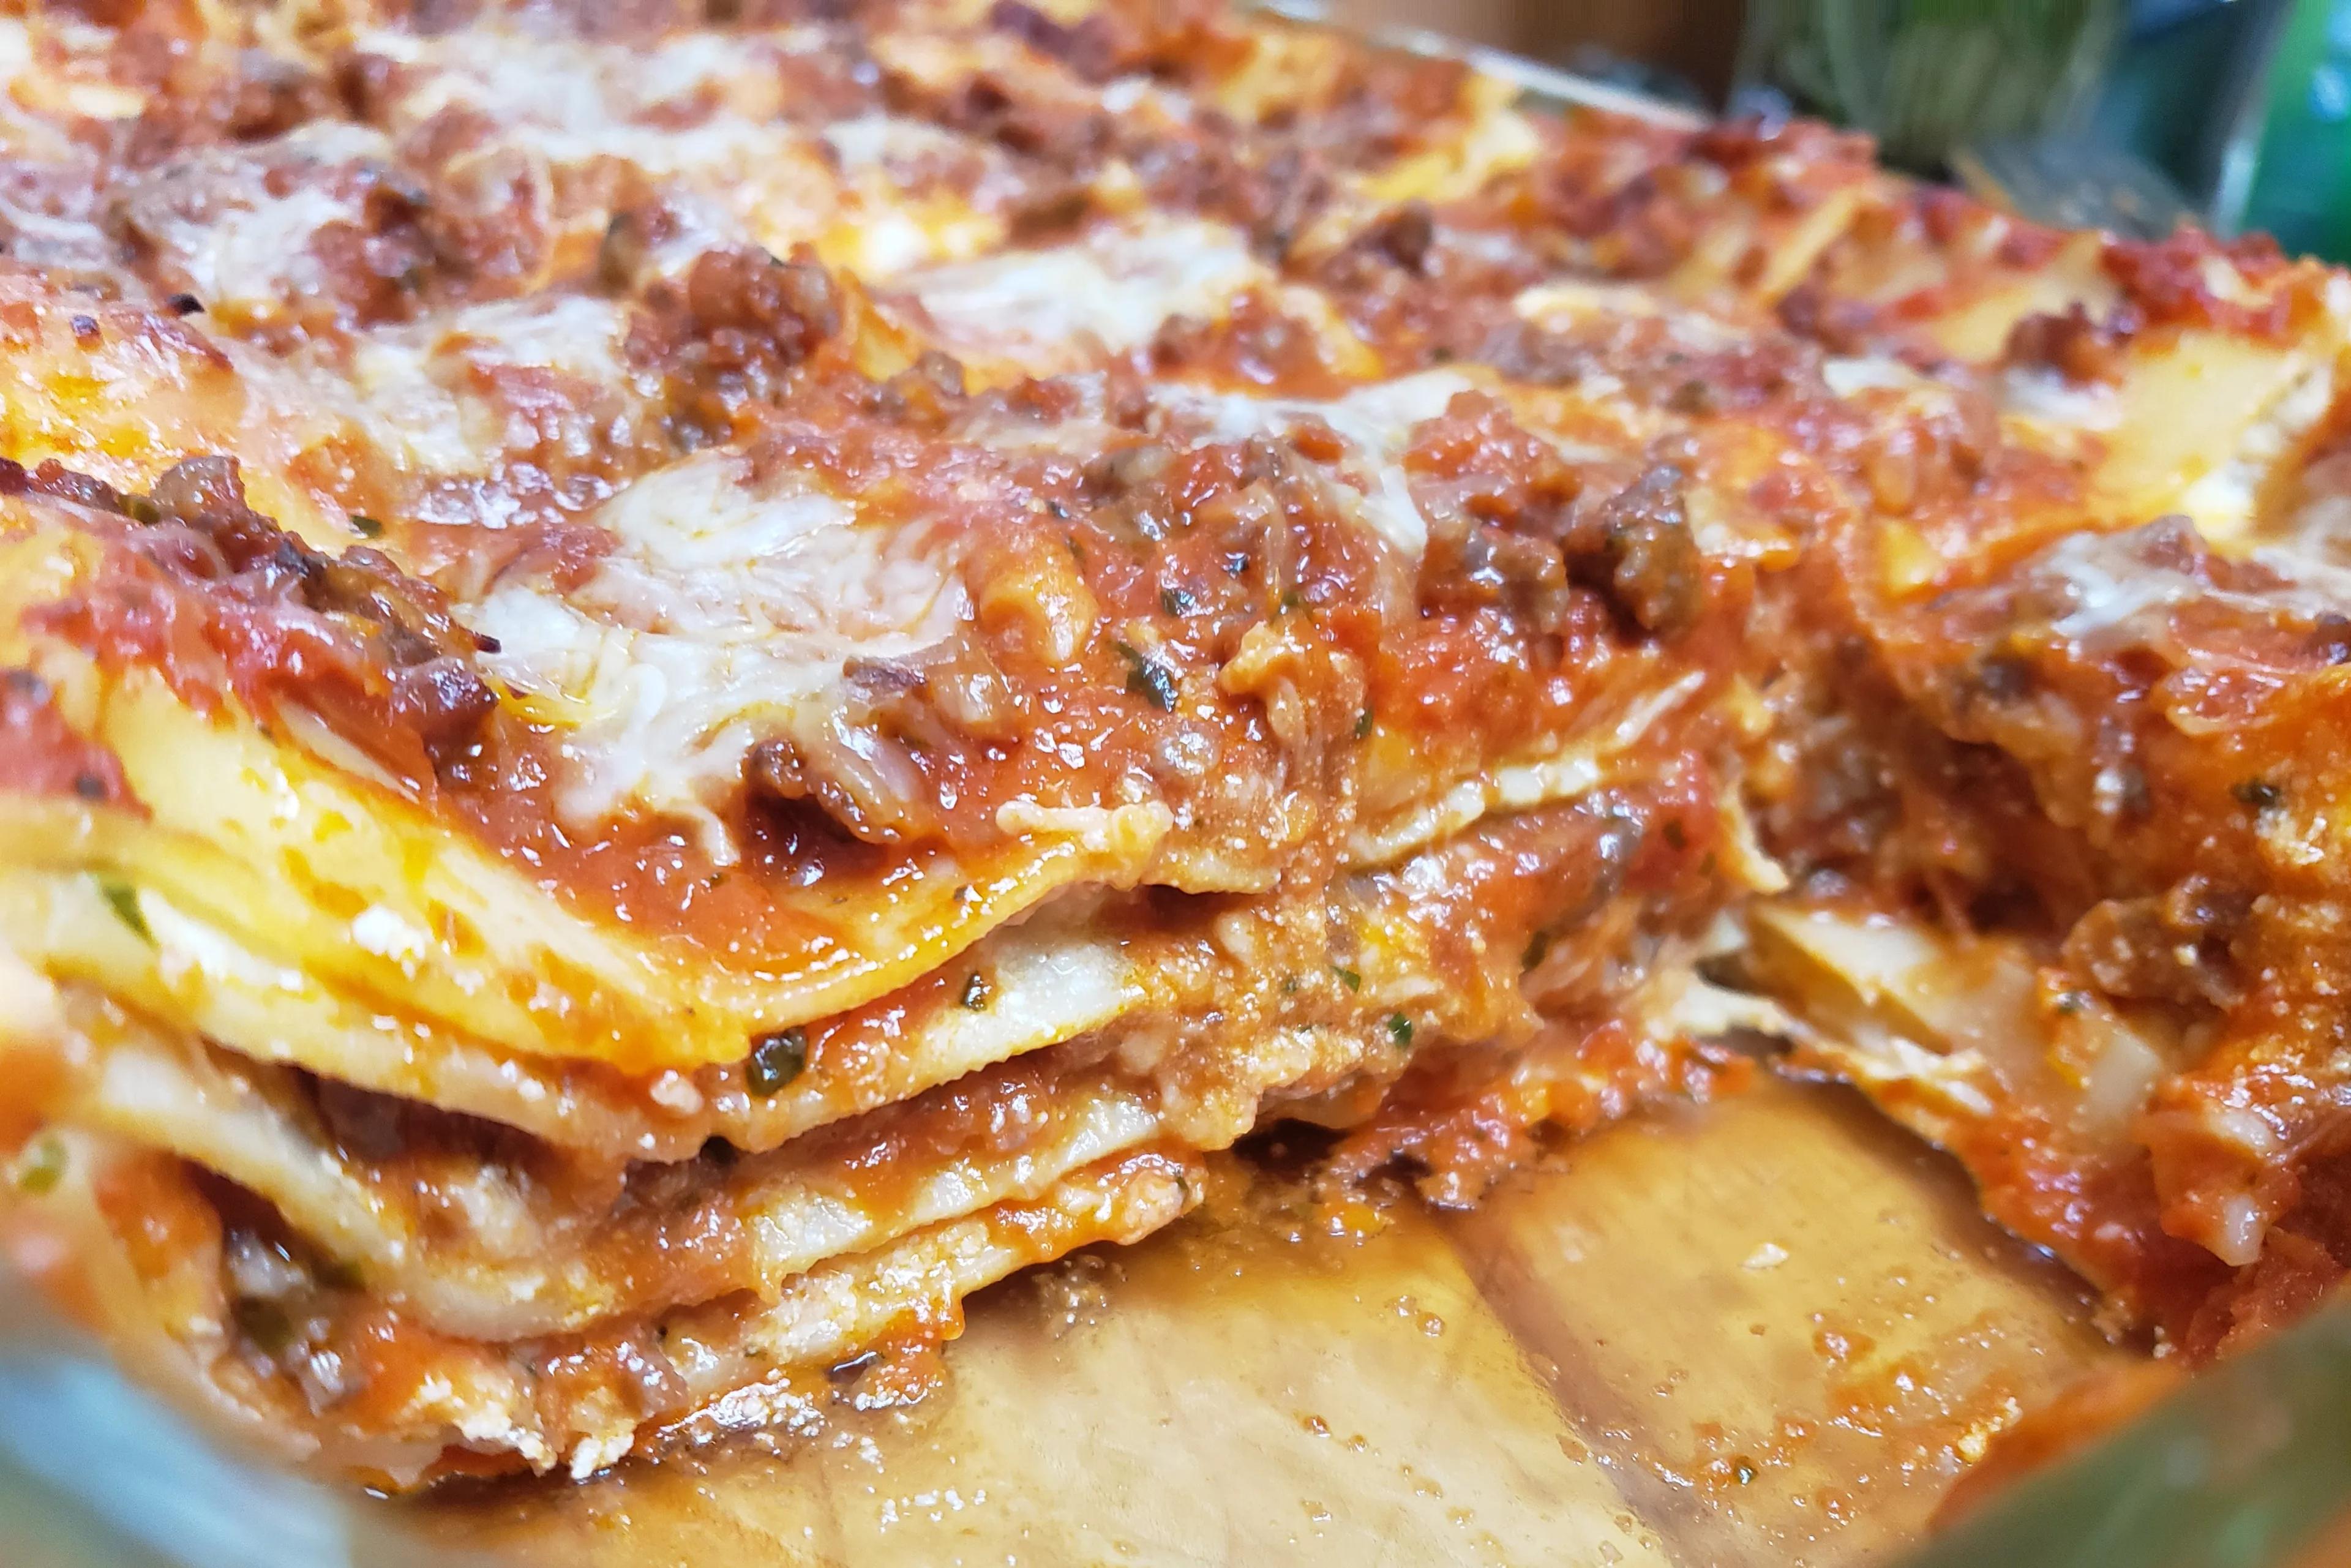 Classic Meat Lasagna - My Dragonfly Cafe